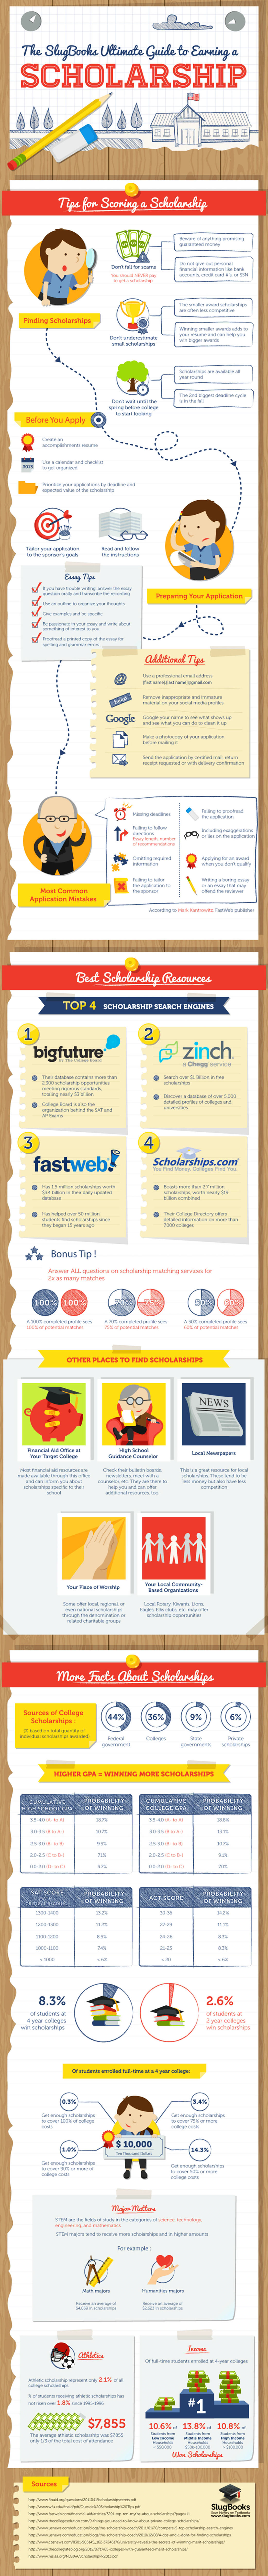 How to Apply for Scholarships for College Infographic